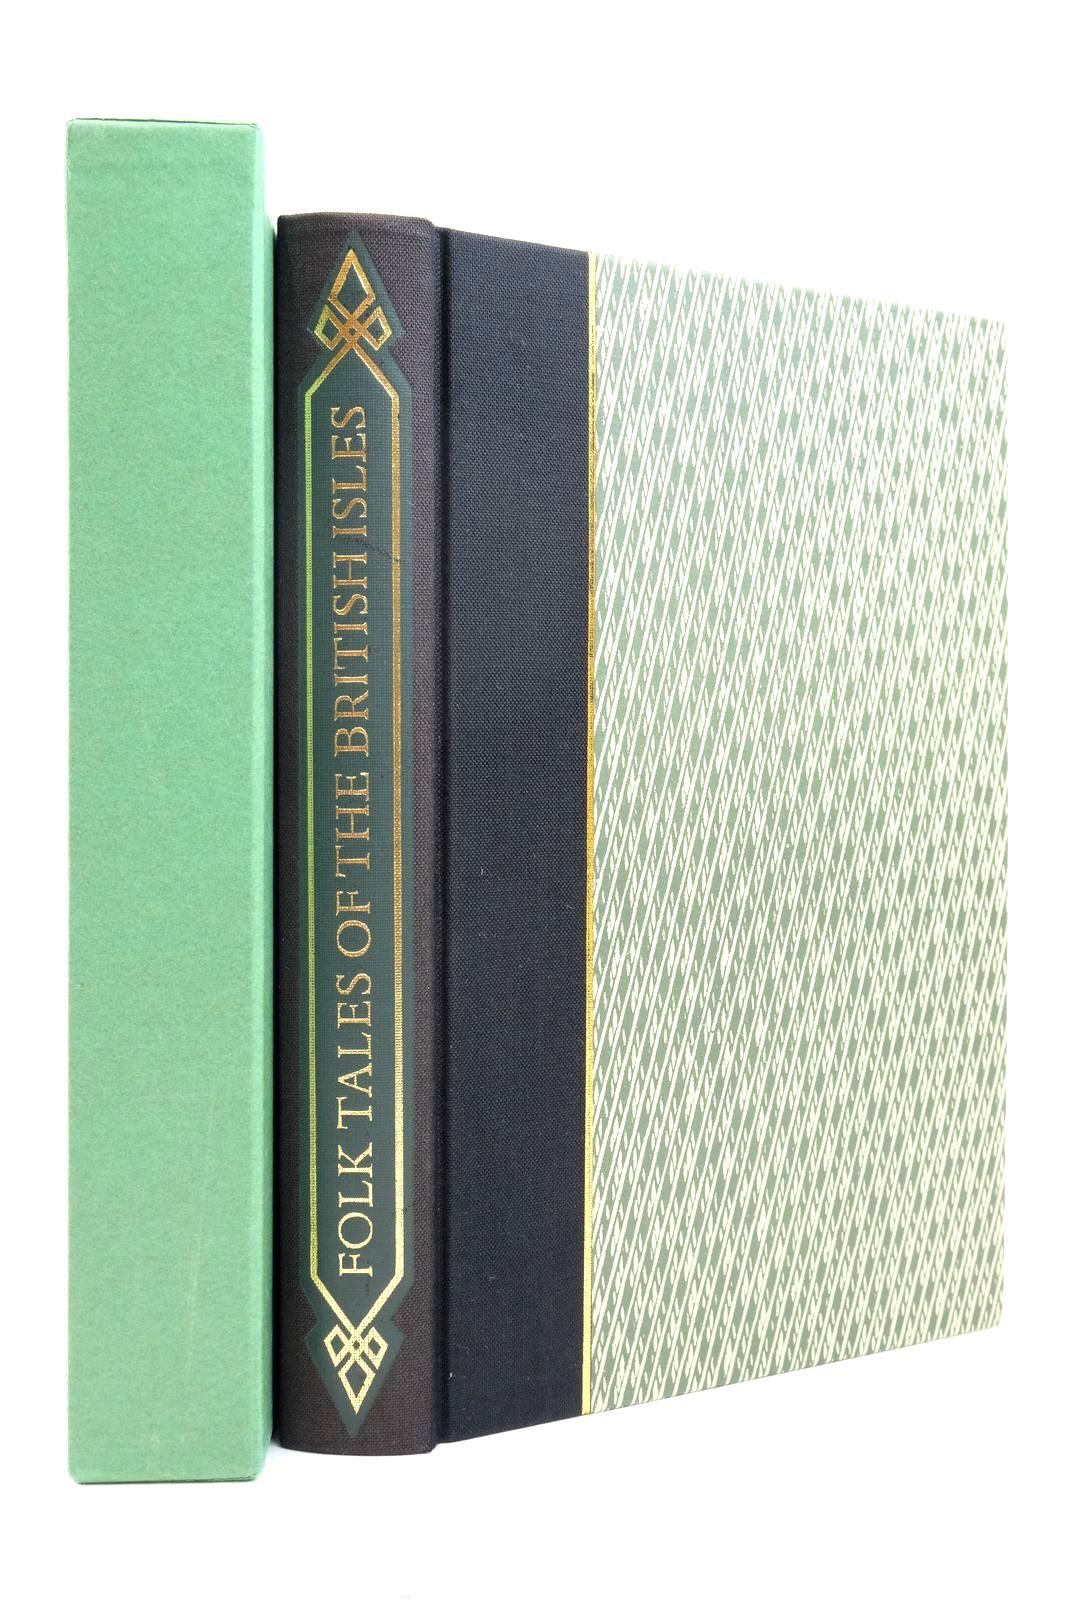 Photo of FOLK TALES OF THE BRITISH ISLES written by Crossley-Holland, Kevin illustrated by Firmin, Hannah published by Folio Society (STOCK CODE: 2138400)  for sale by Stella & Rose's Books